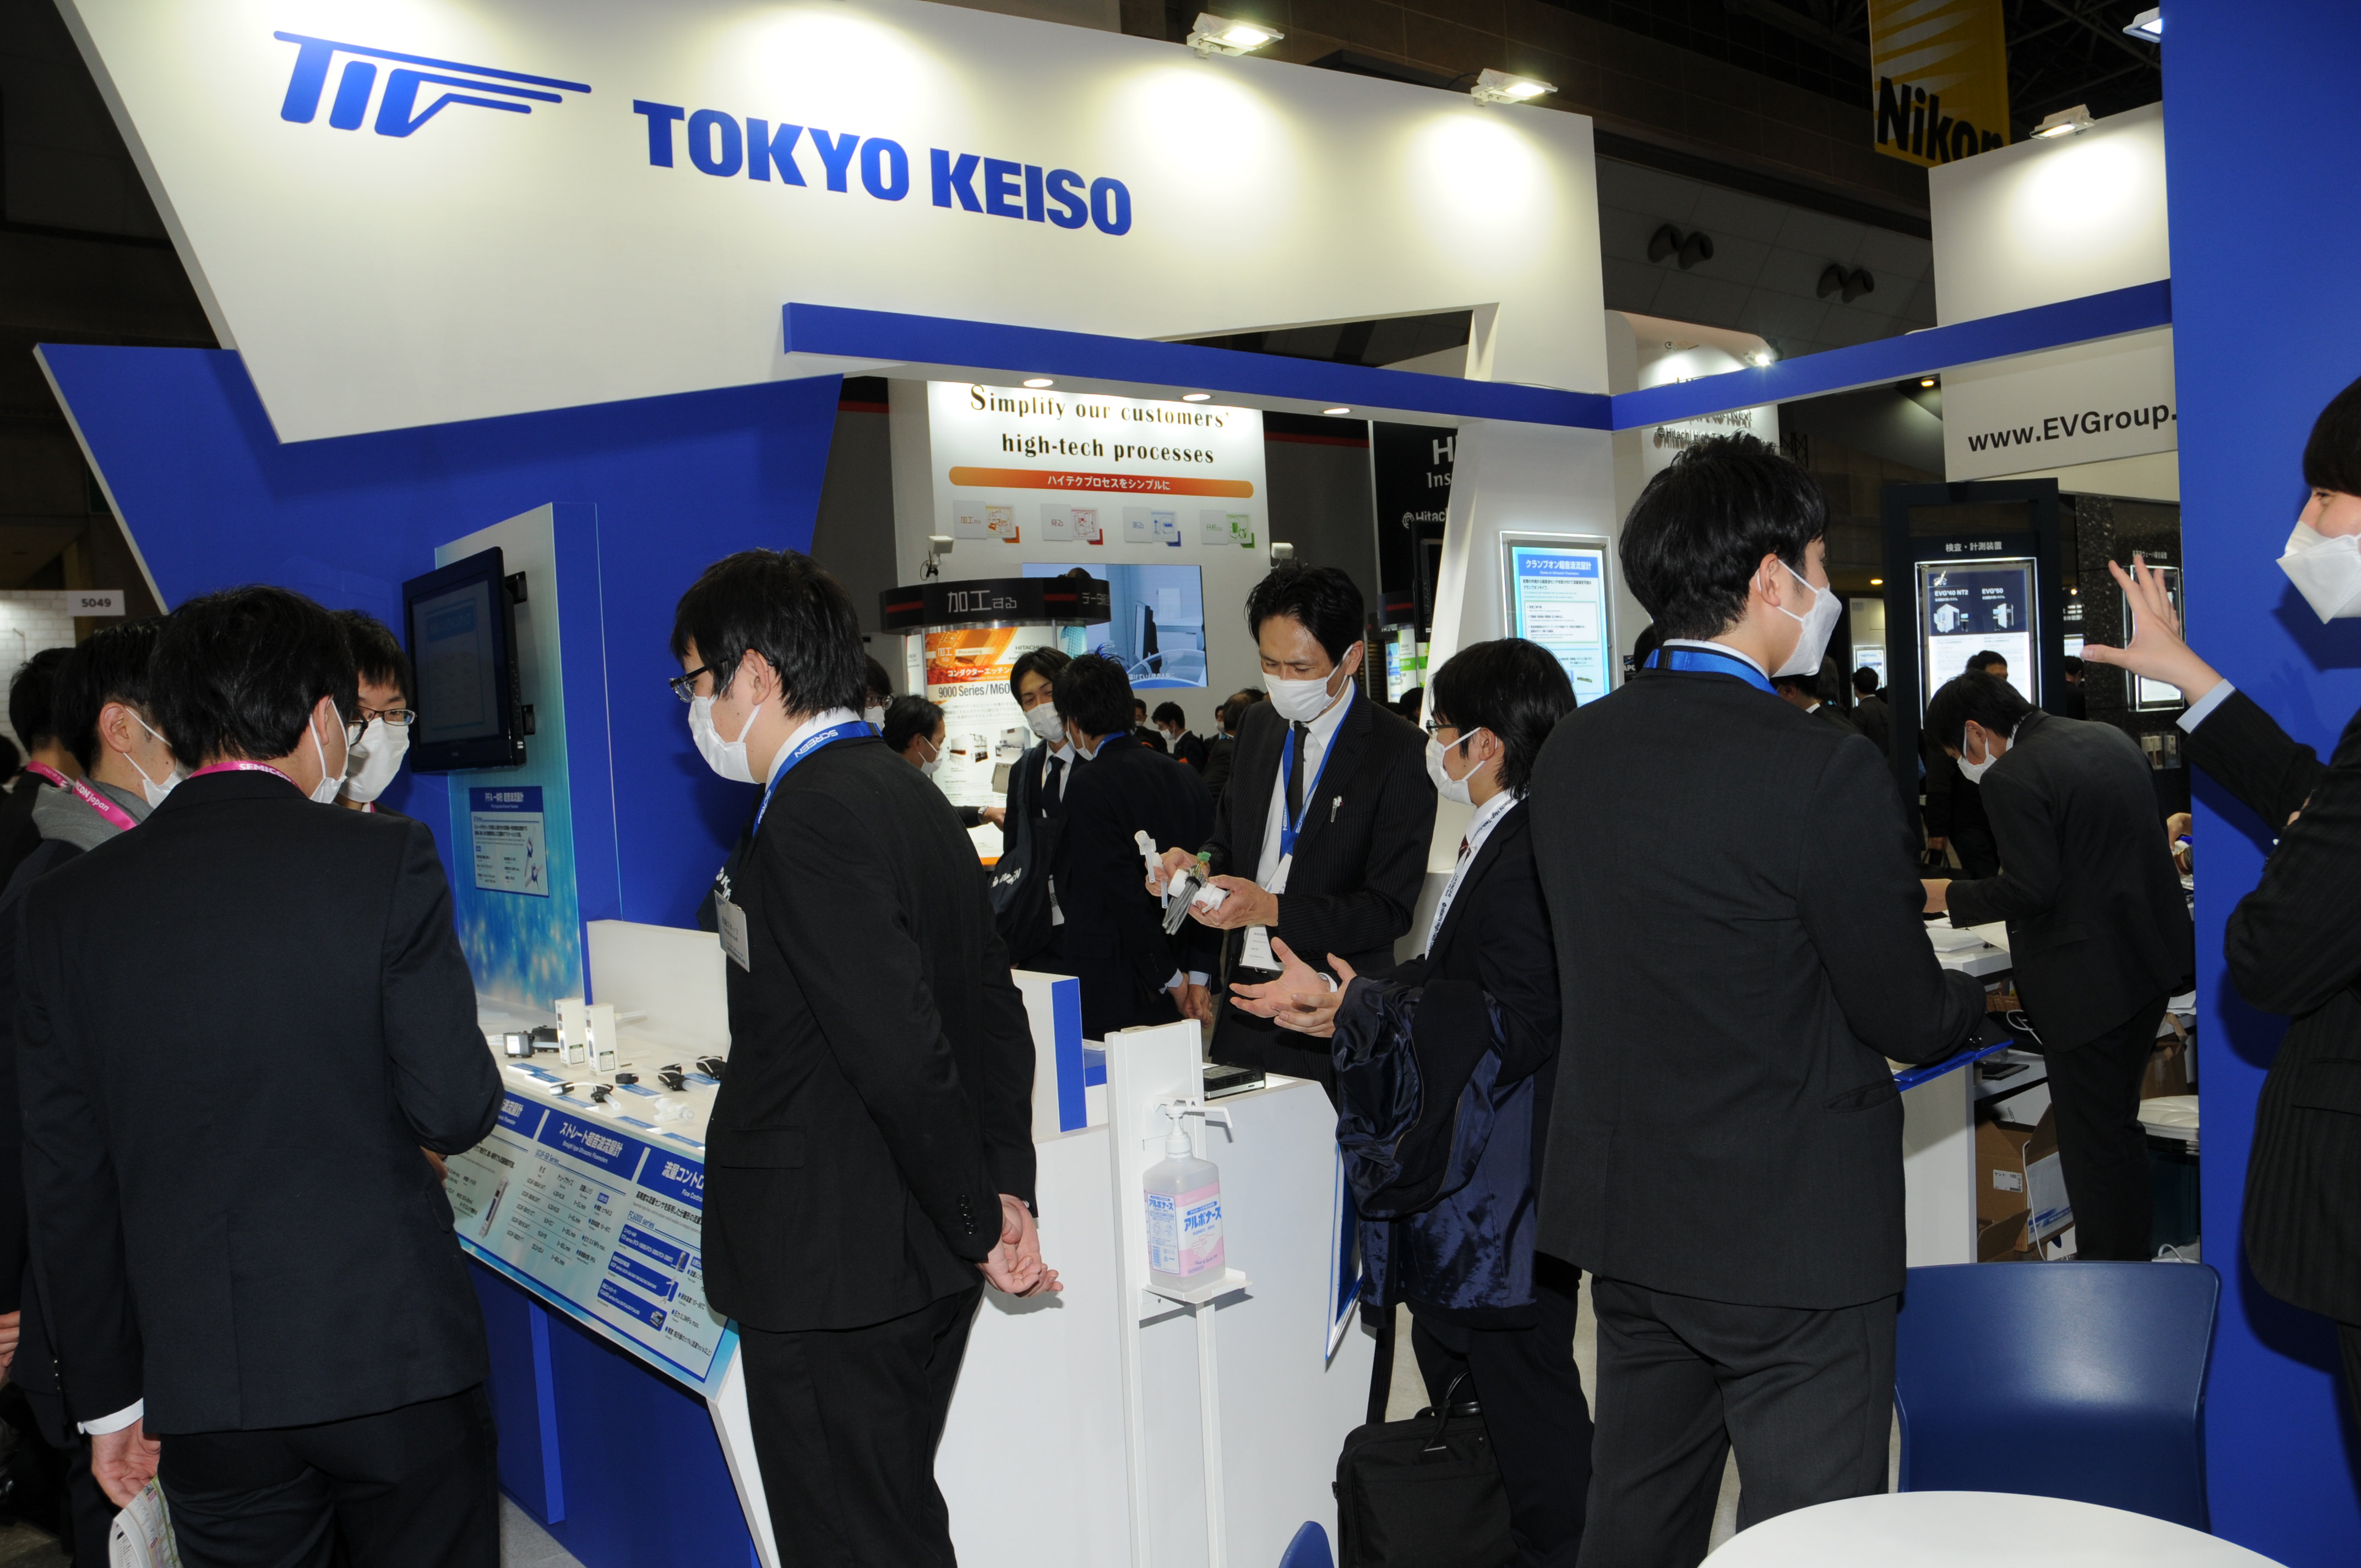 Thank you for visiting "SEMICON Japan 2022"